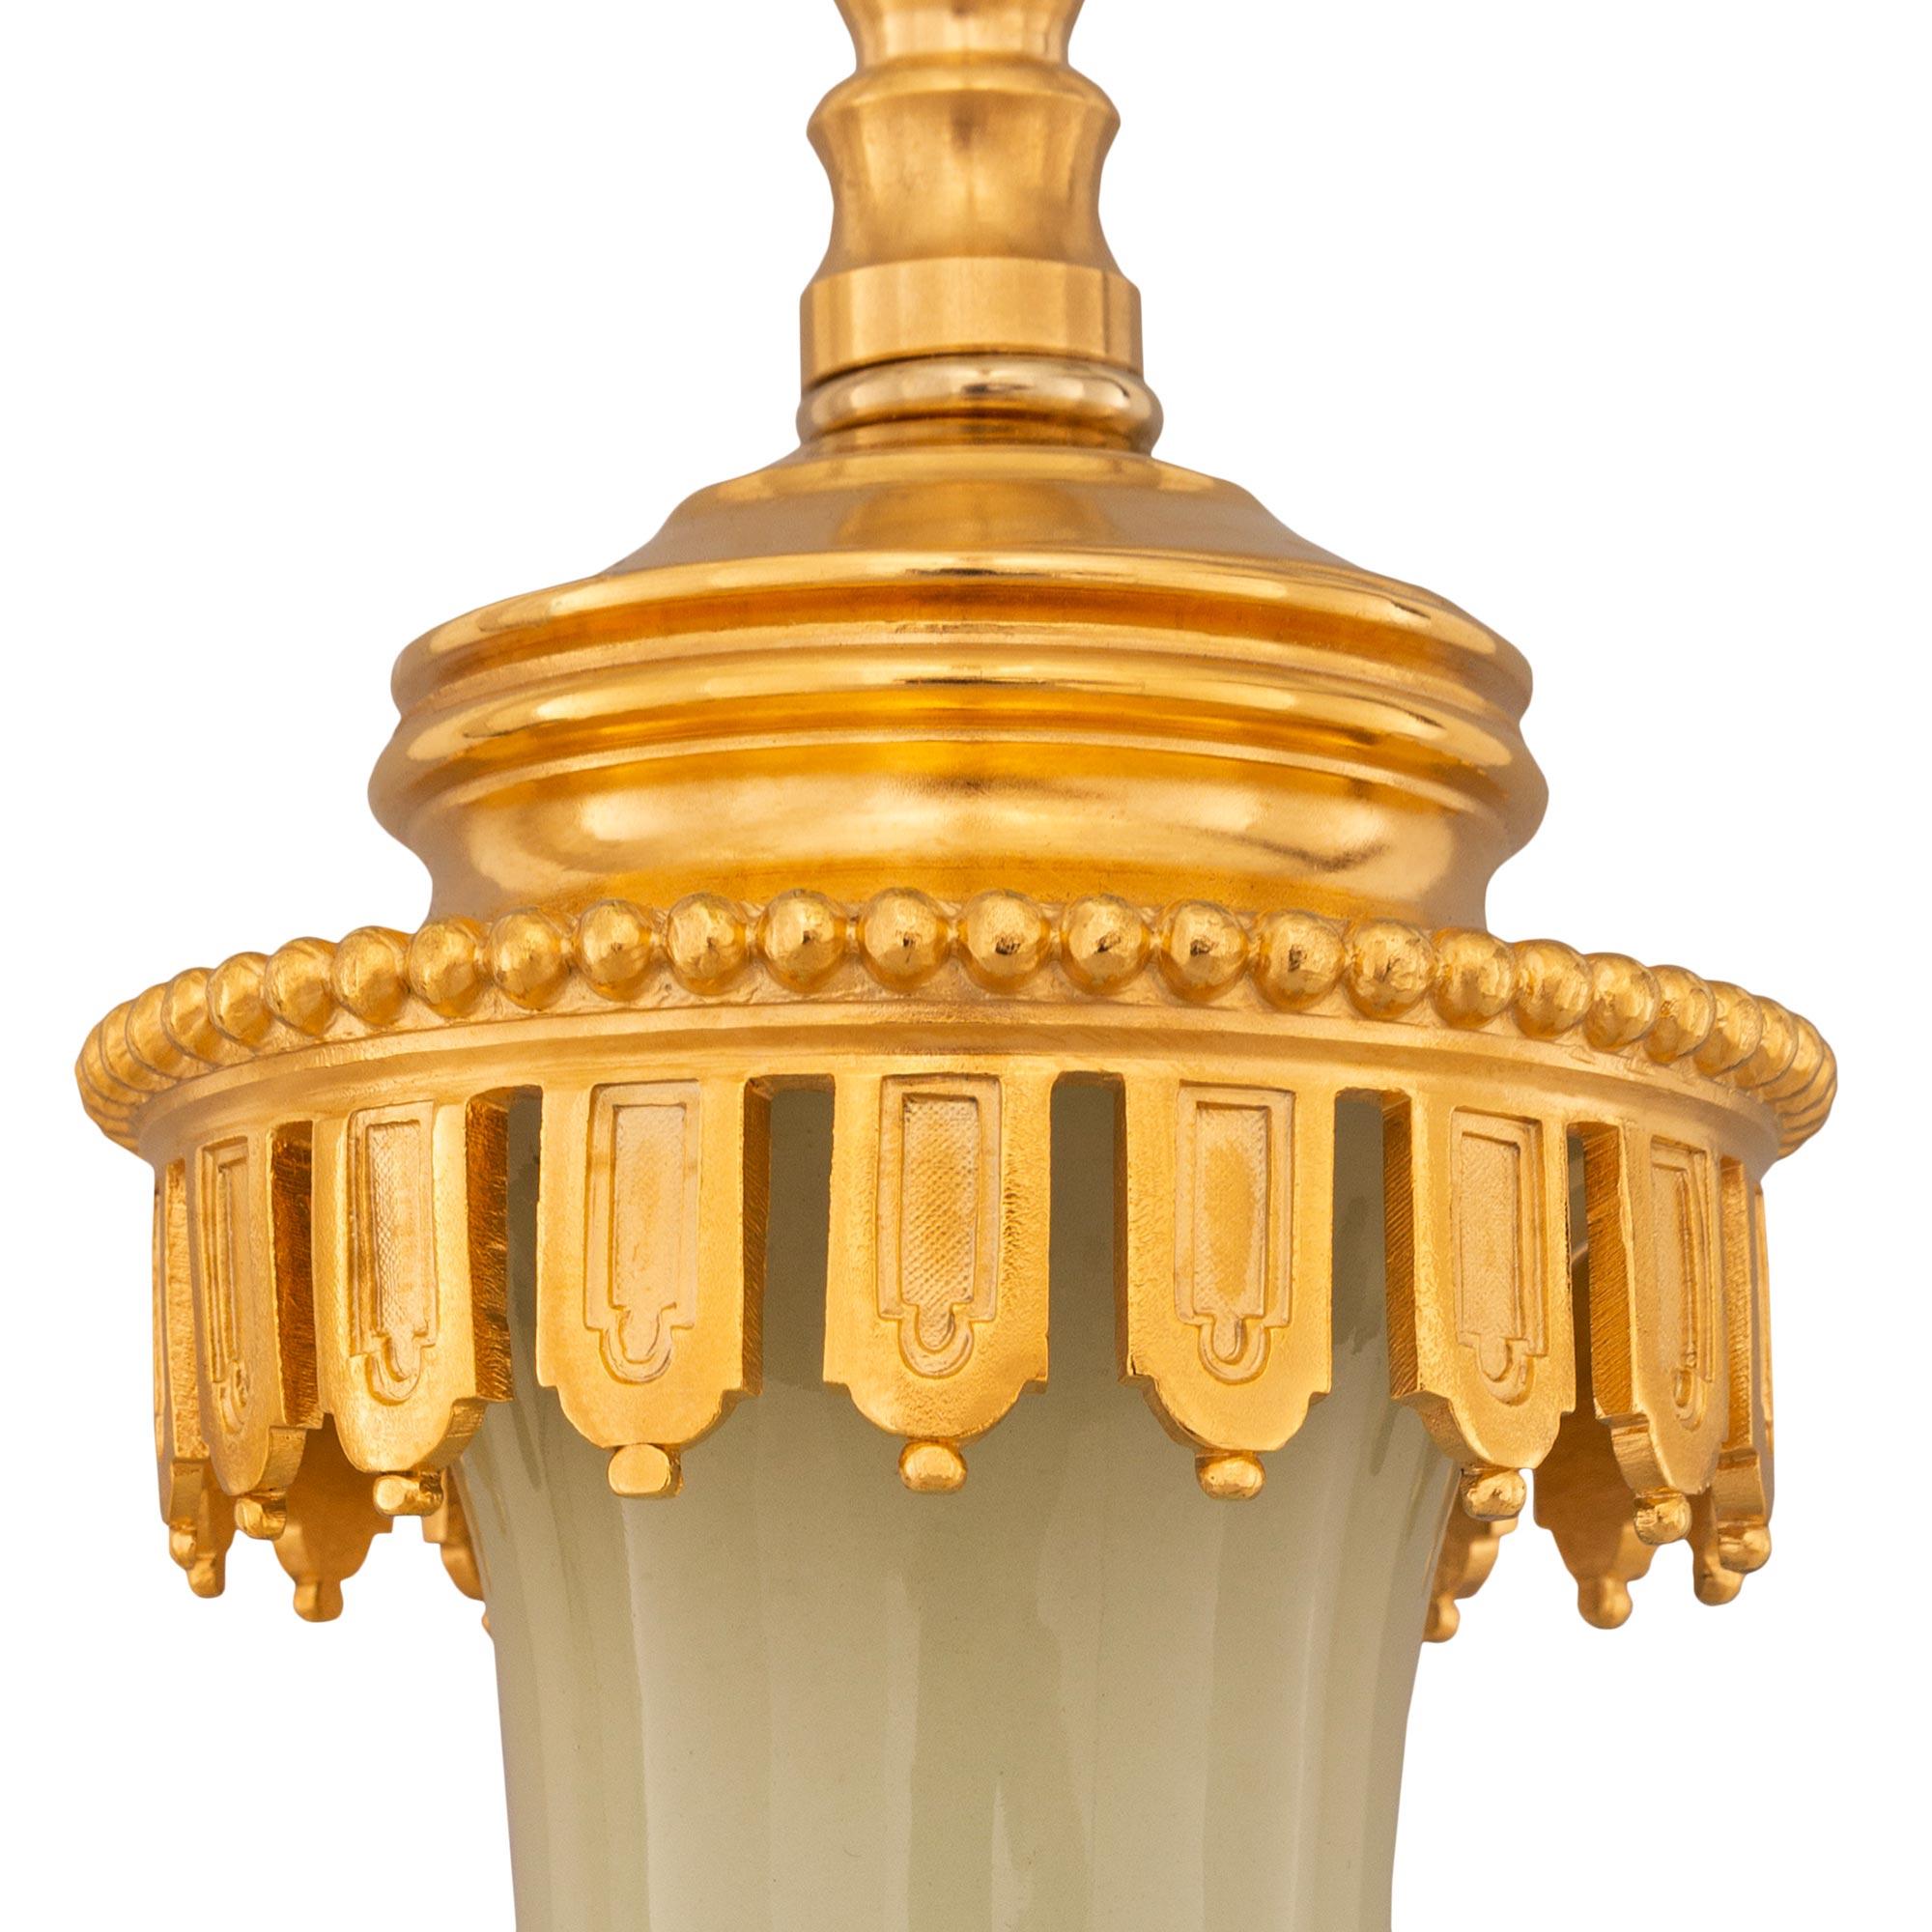 French 19th Century Louis XVI St. Celadon Porcelain And Ormolu Lamp For Sale 2